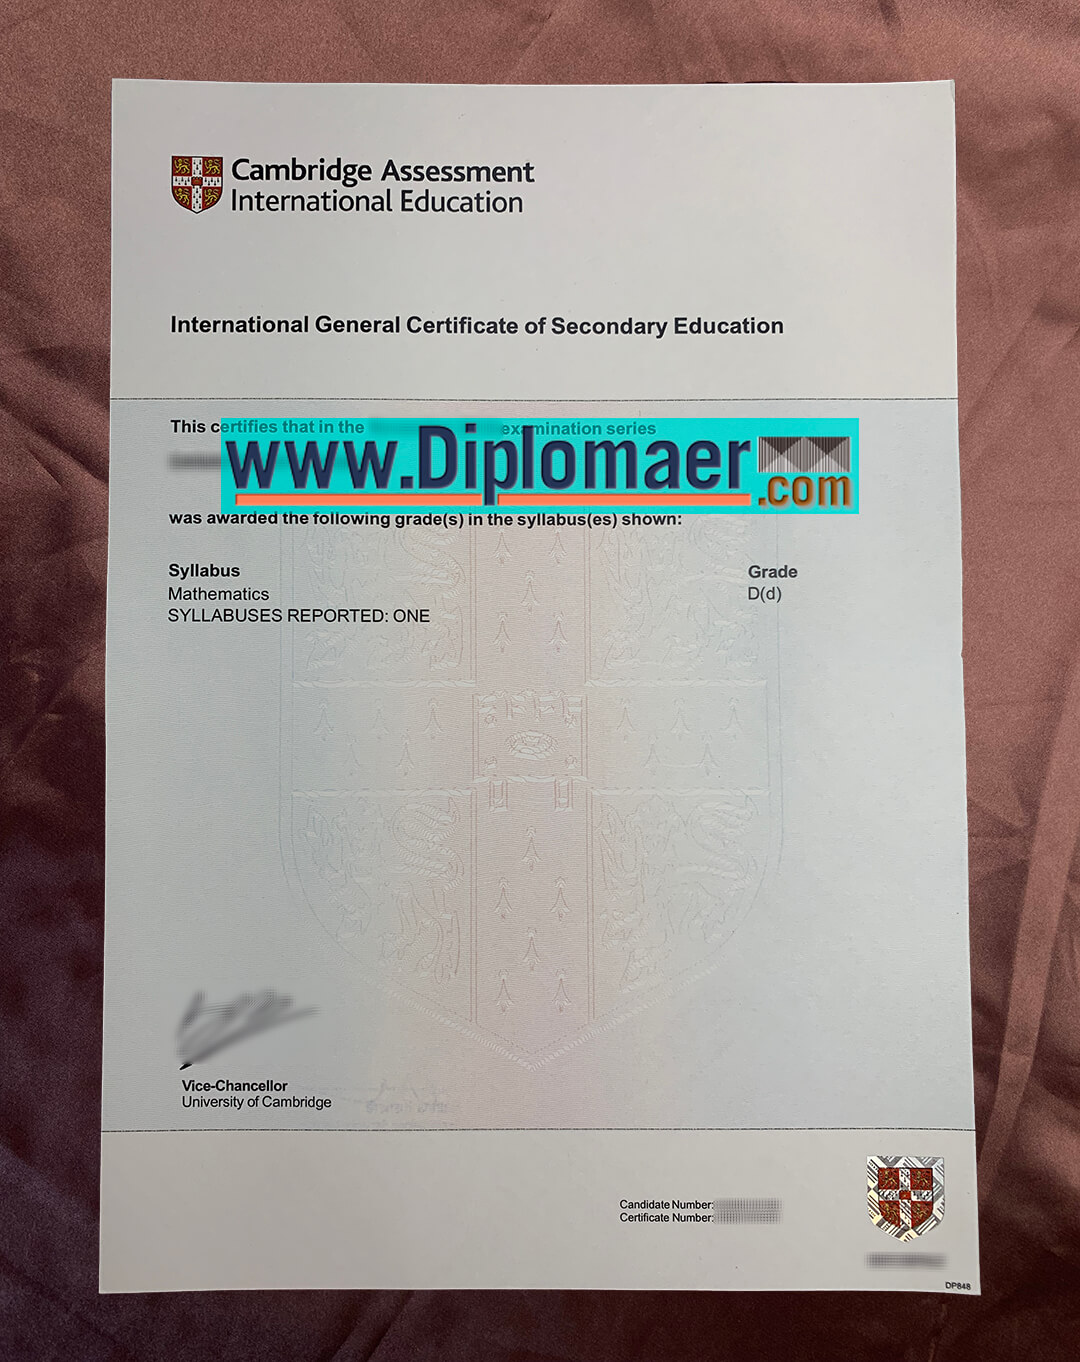 IGCSE Fake Diploma - What is the use of getting the IGCSE Diploma certificate?